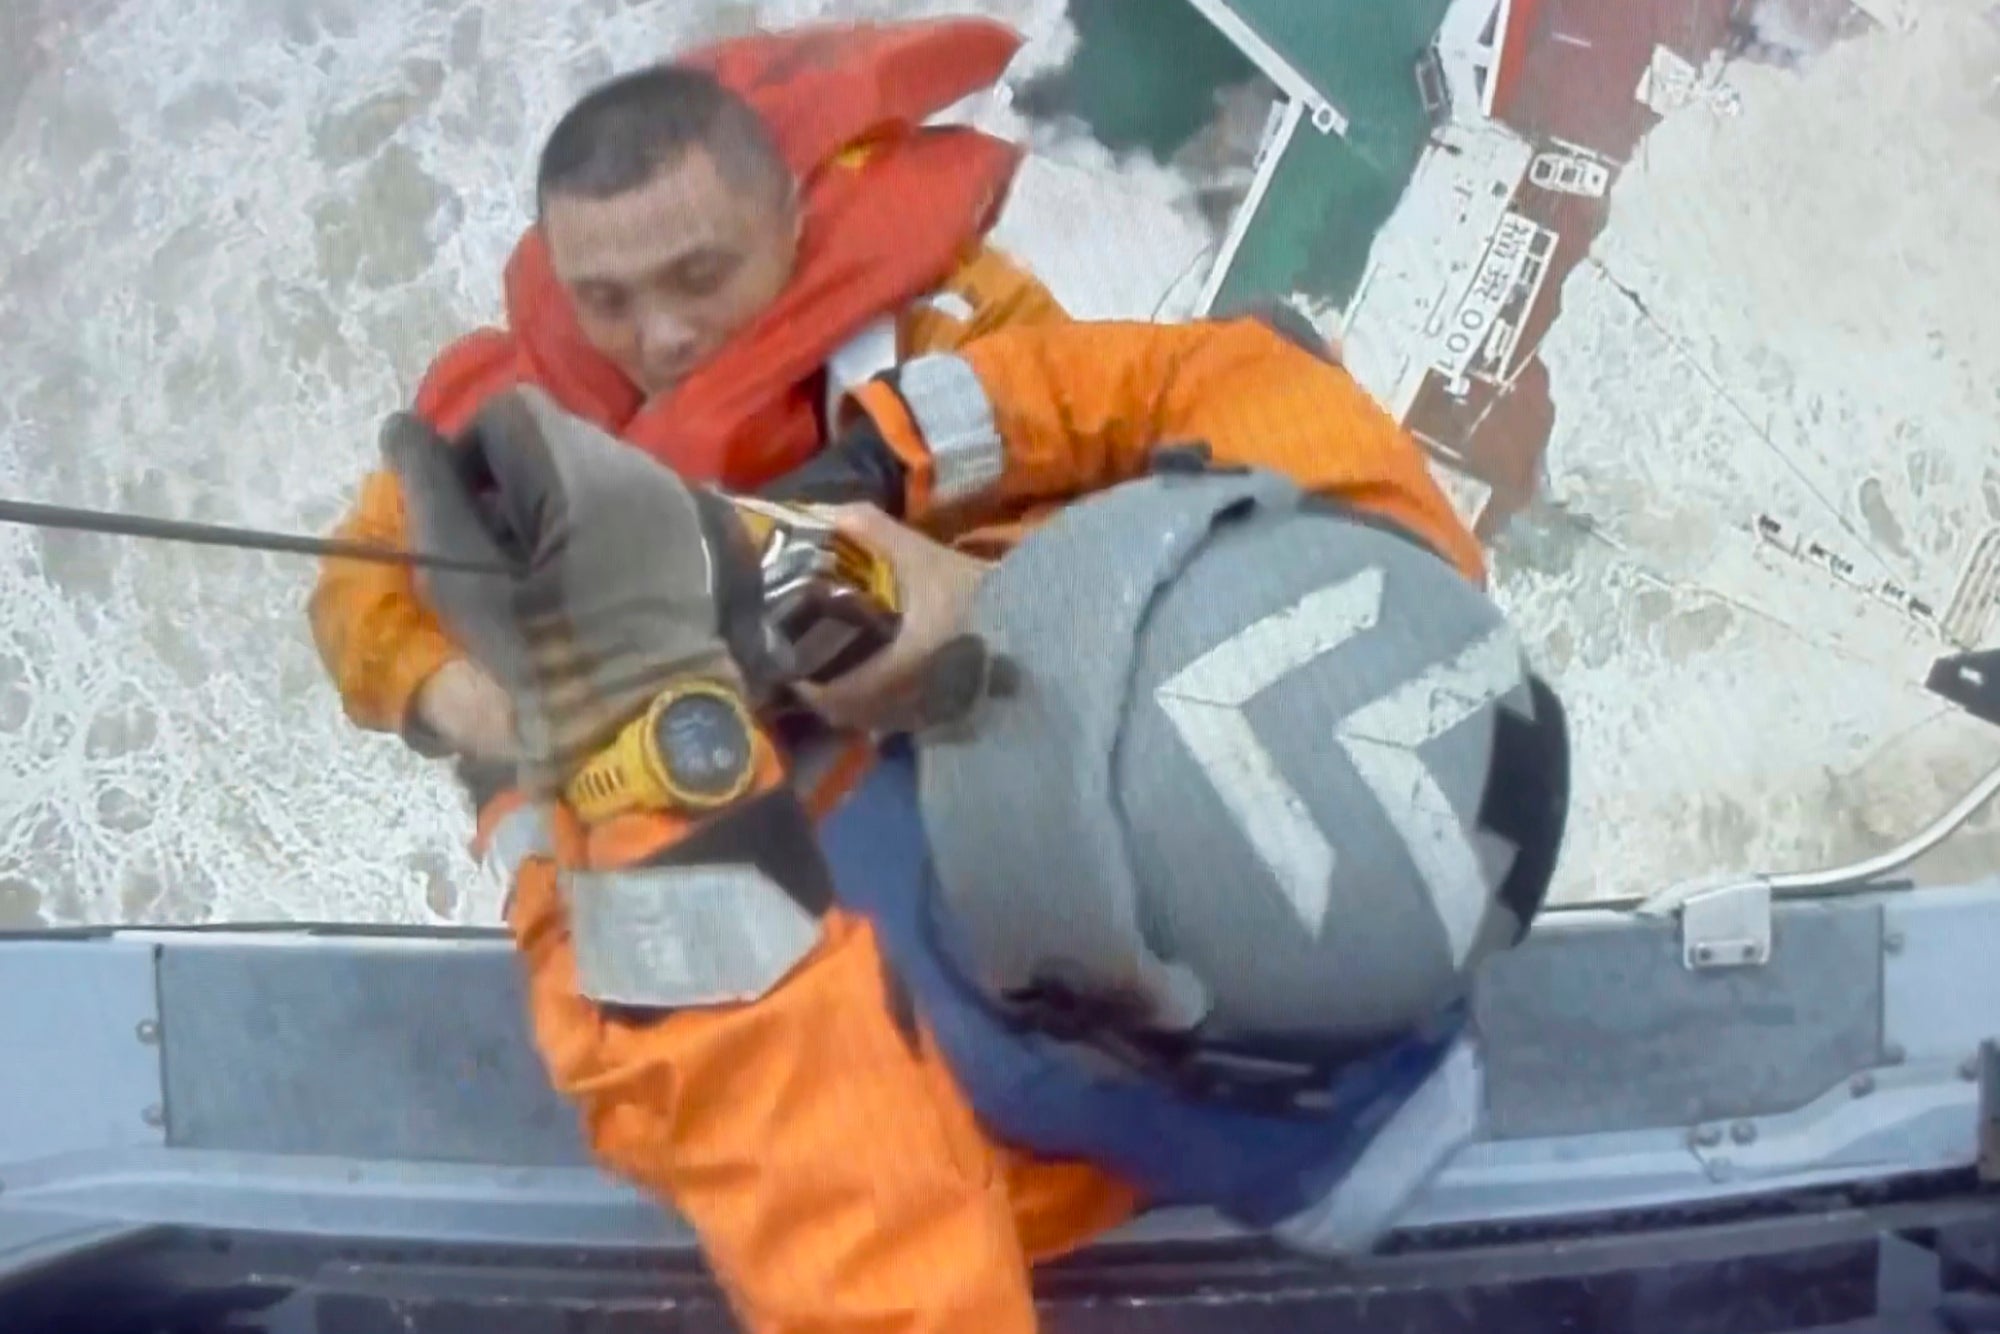 Helicopter crew members winch up a man from a sinking ship in the South China Sea